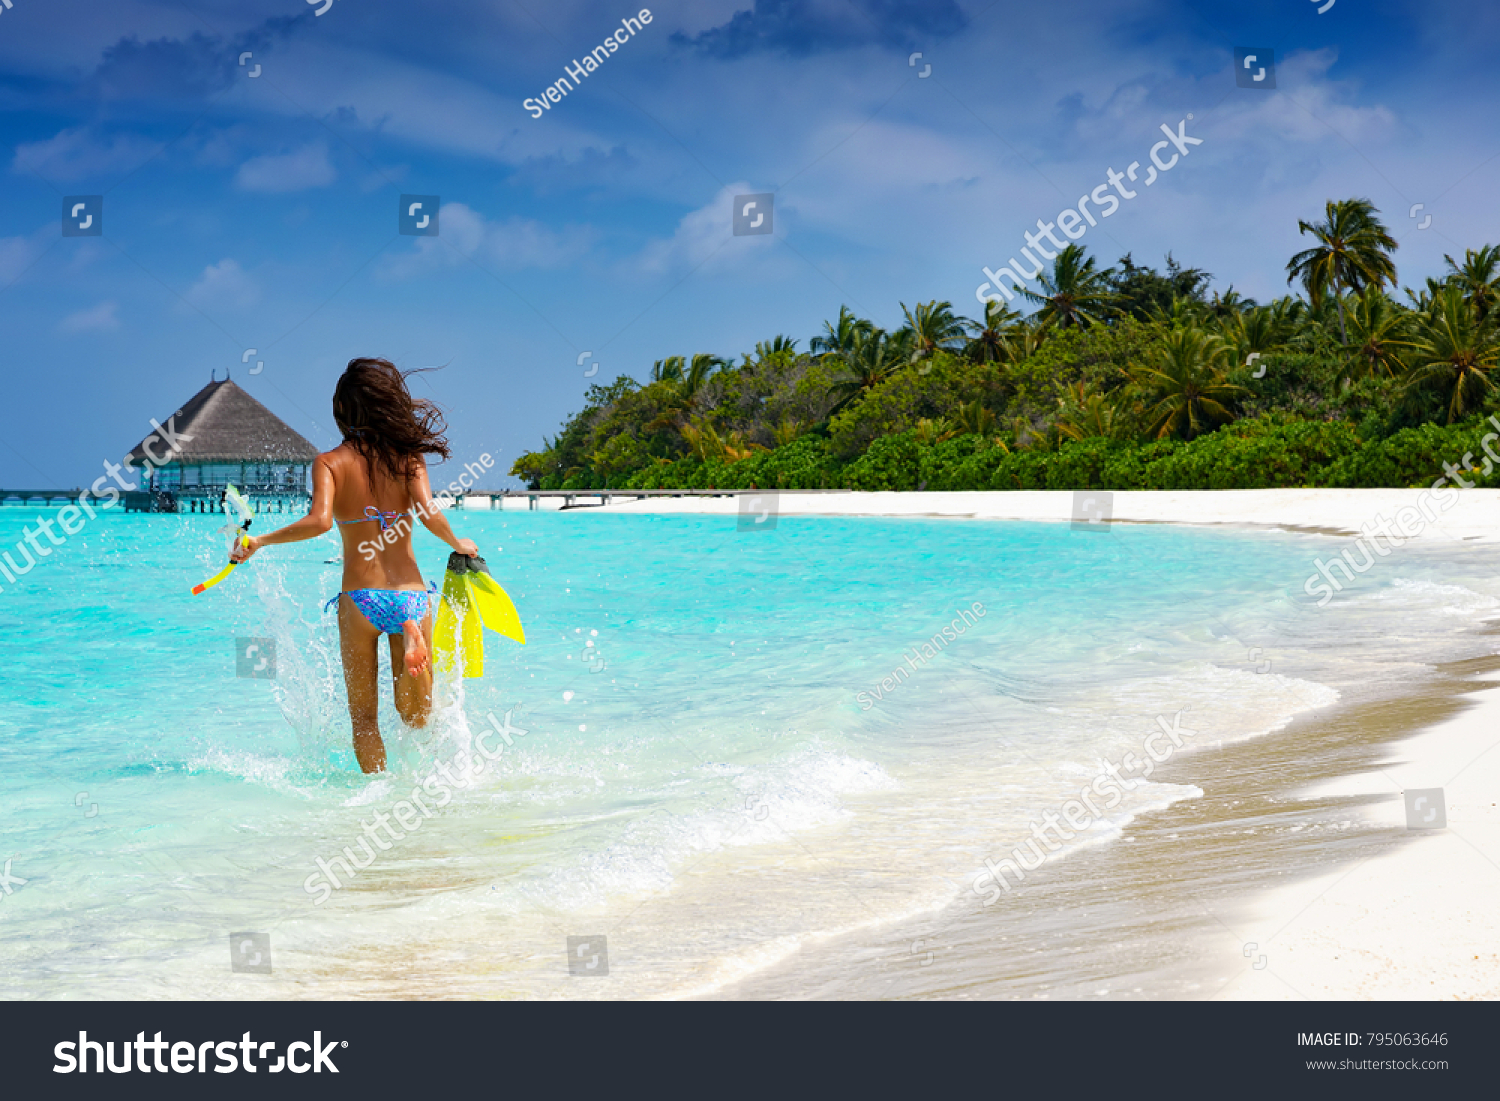 Woman with snorkeling gear running into the turquoise, tropical waters of the Maldives #795063646